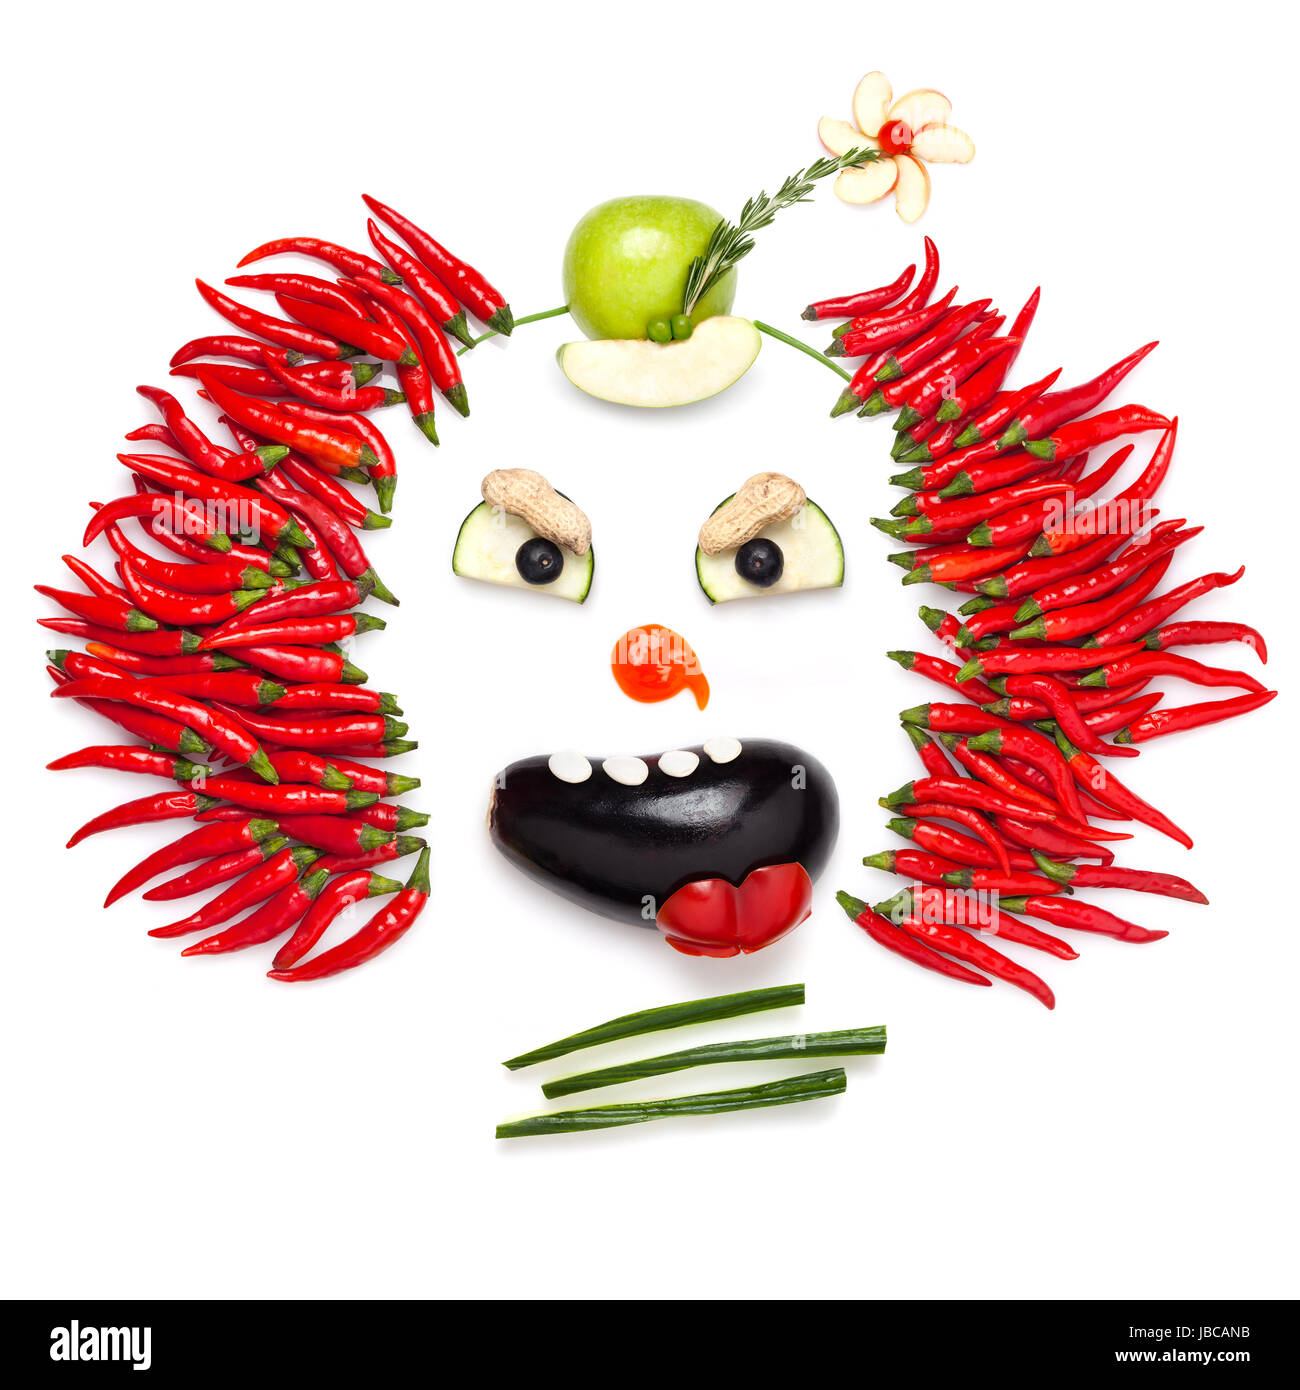 A creative food concept demonstrating a creepy halloween clown with the help of chilli pepper and other vegetables. Stock Photo